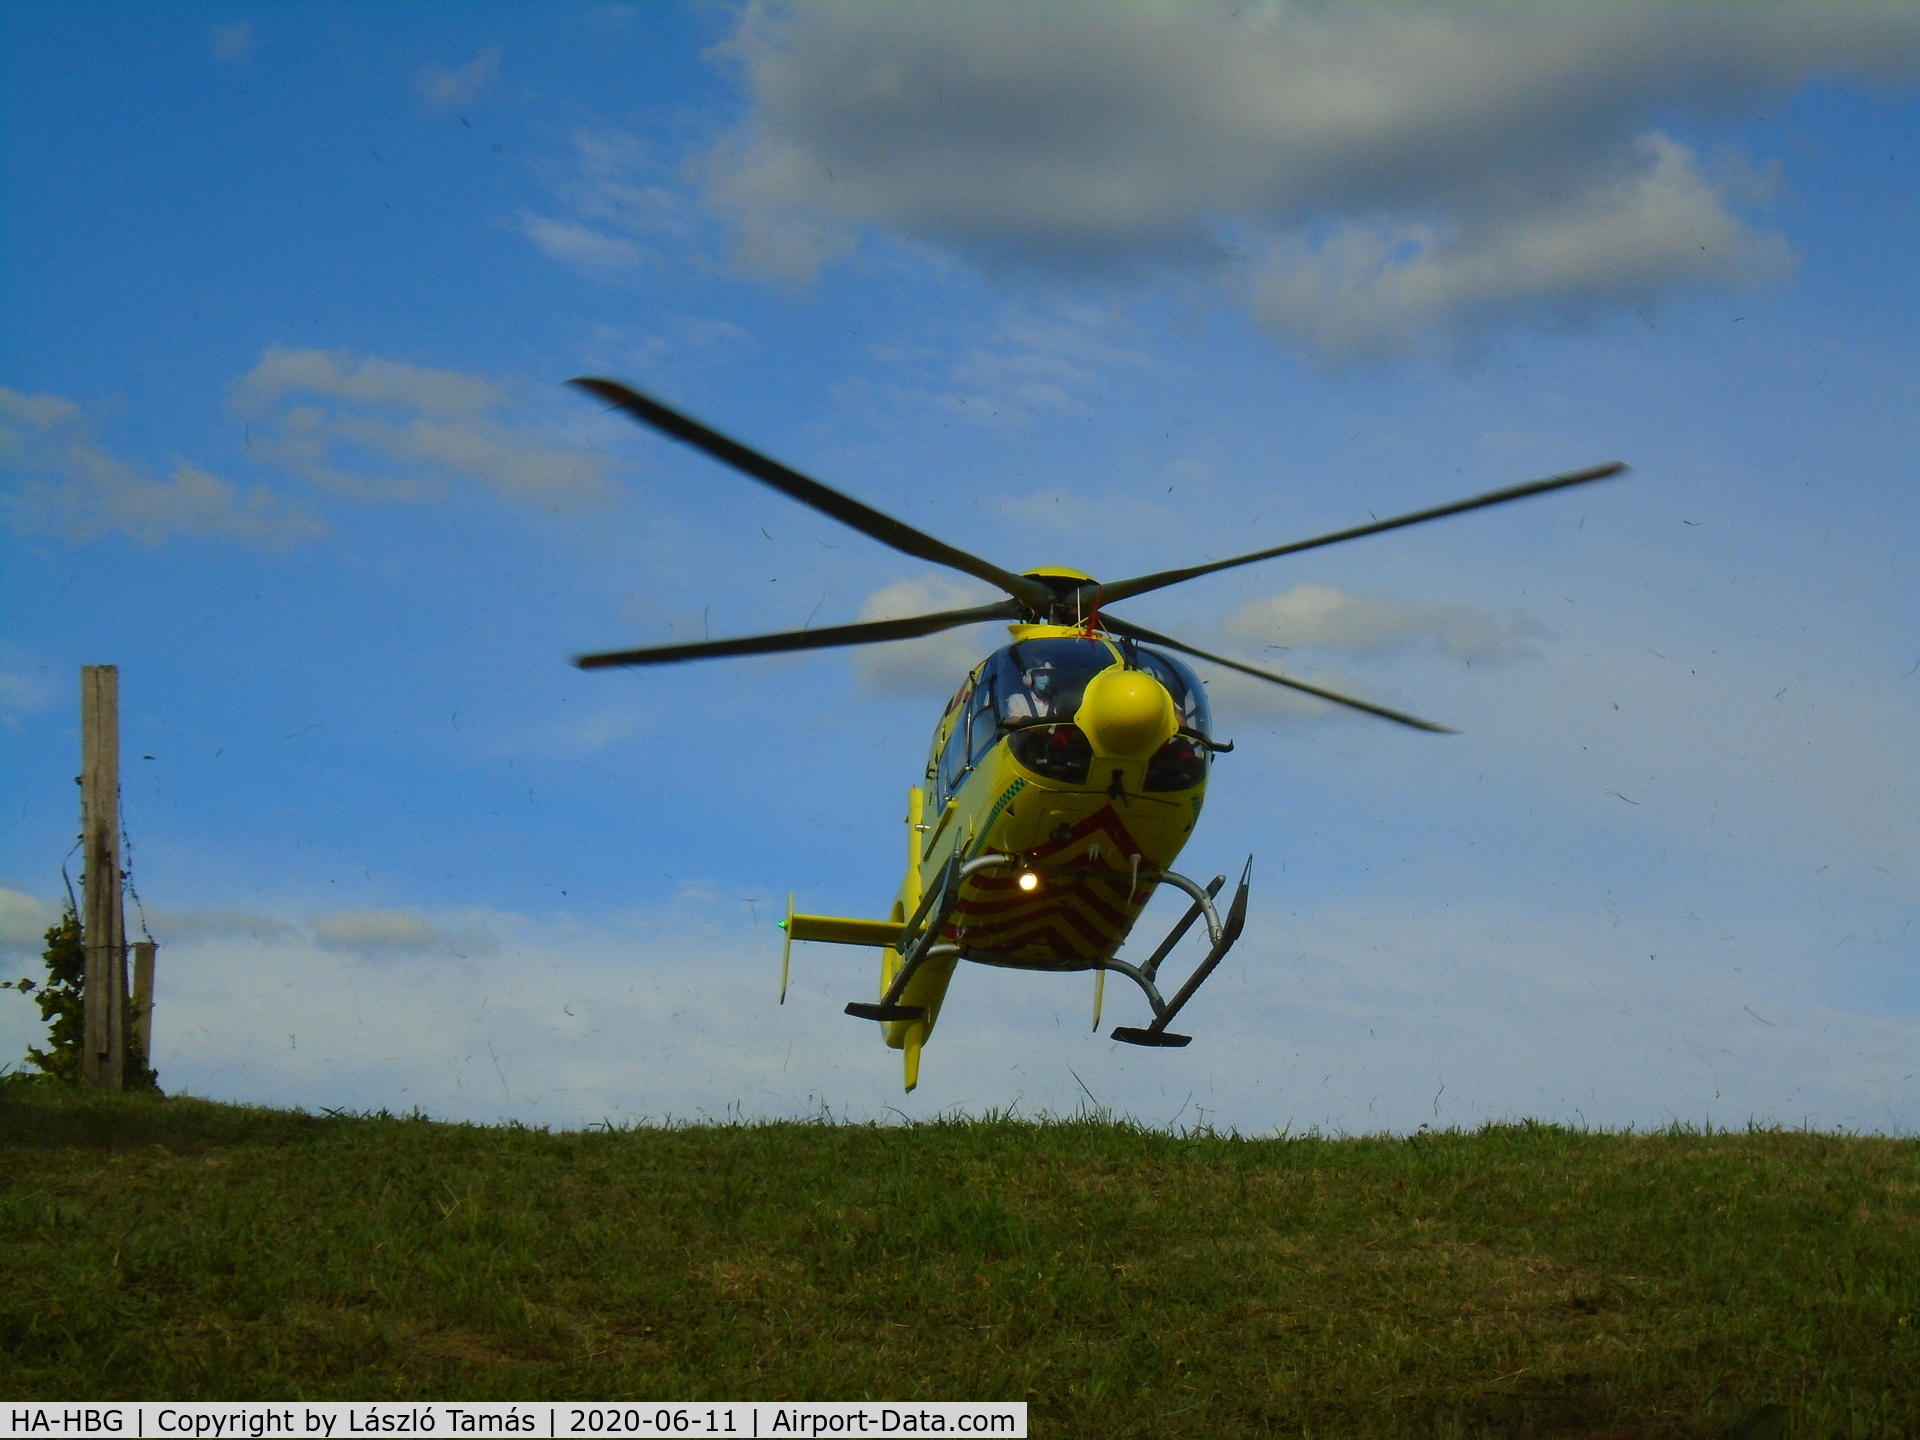 HA-HBG, 2004 Eurocopter EC-135P-2 C/N 0350, Take off and fly to the hospital with a critical patient.